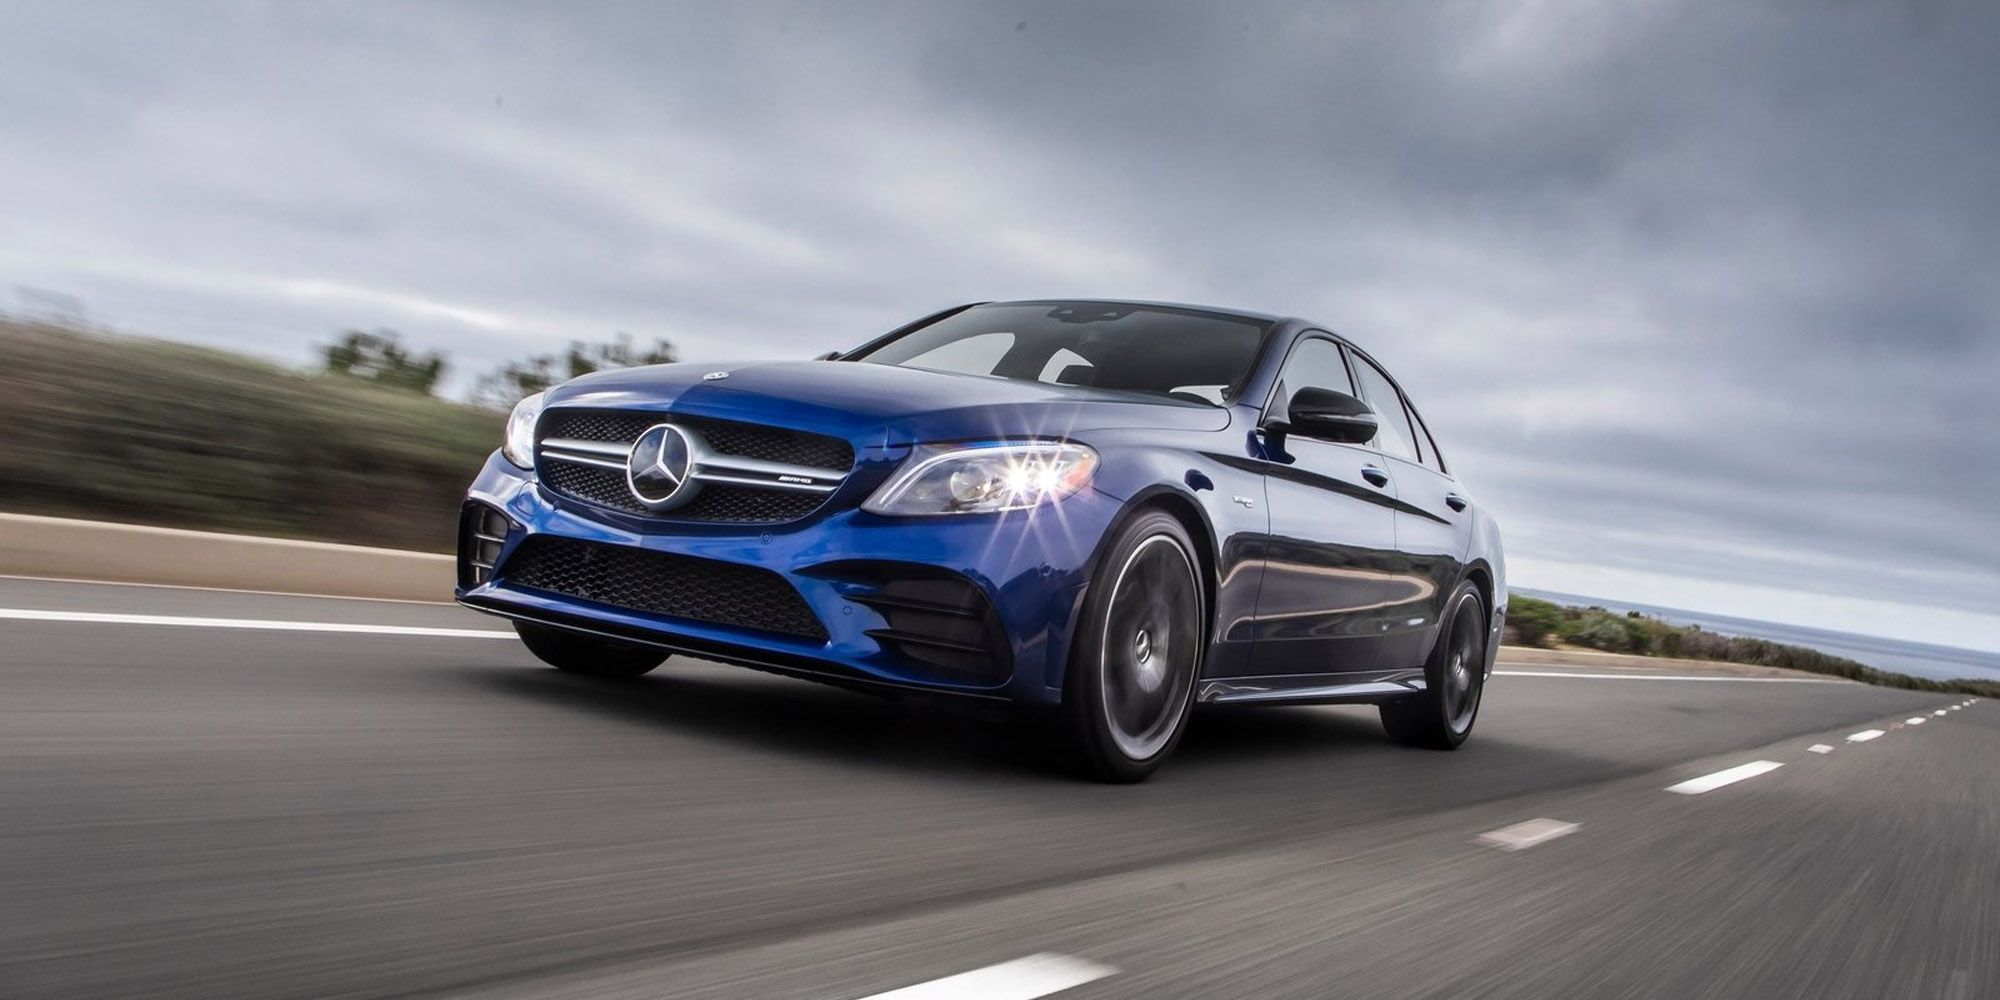 The front of a blue C43 AMG on the move